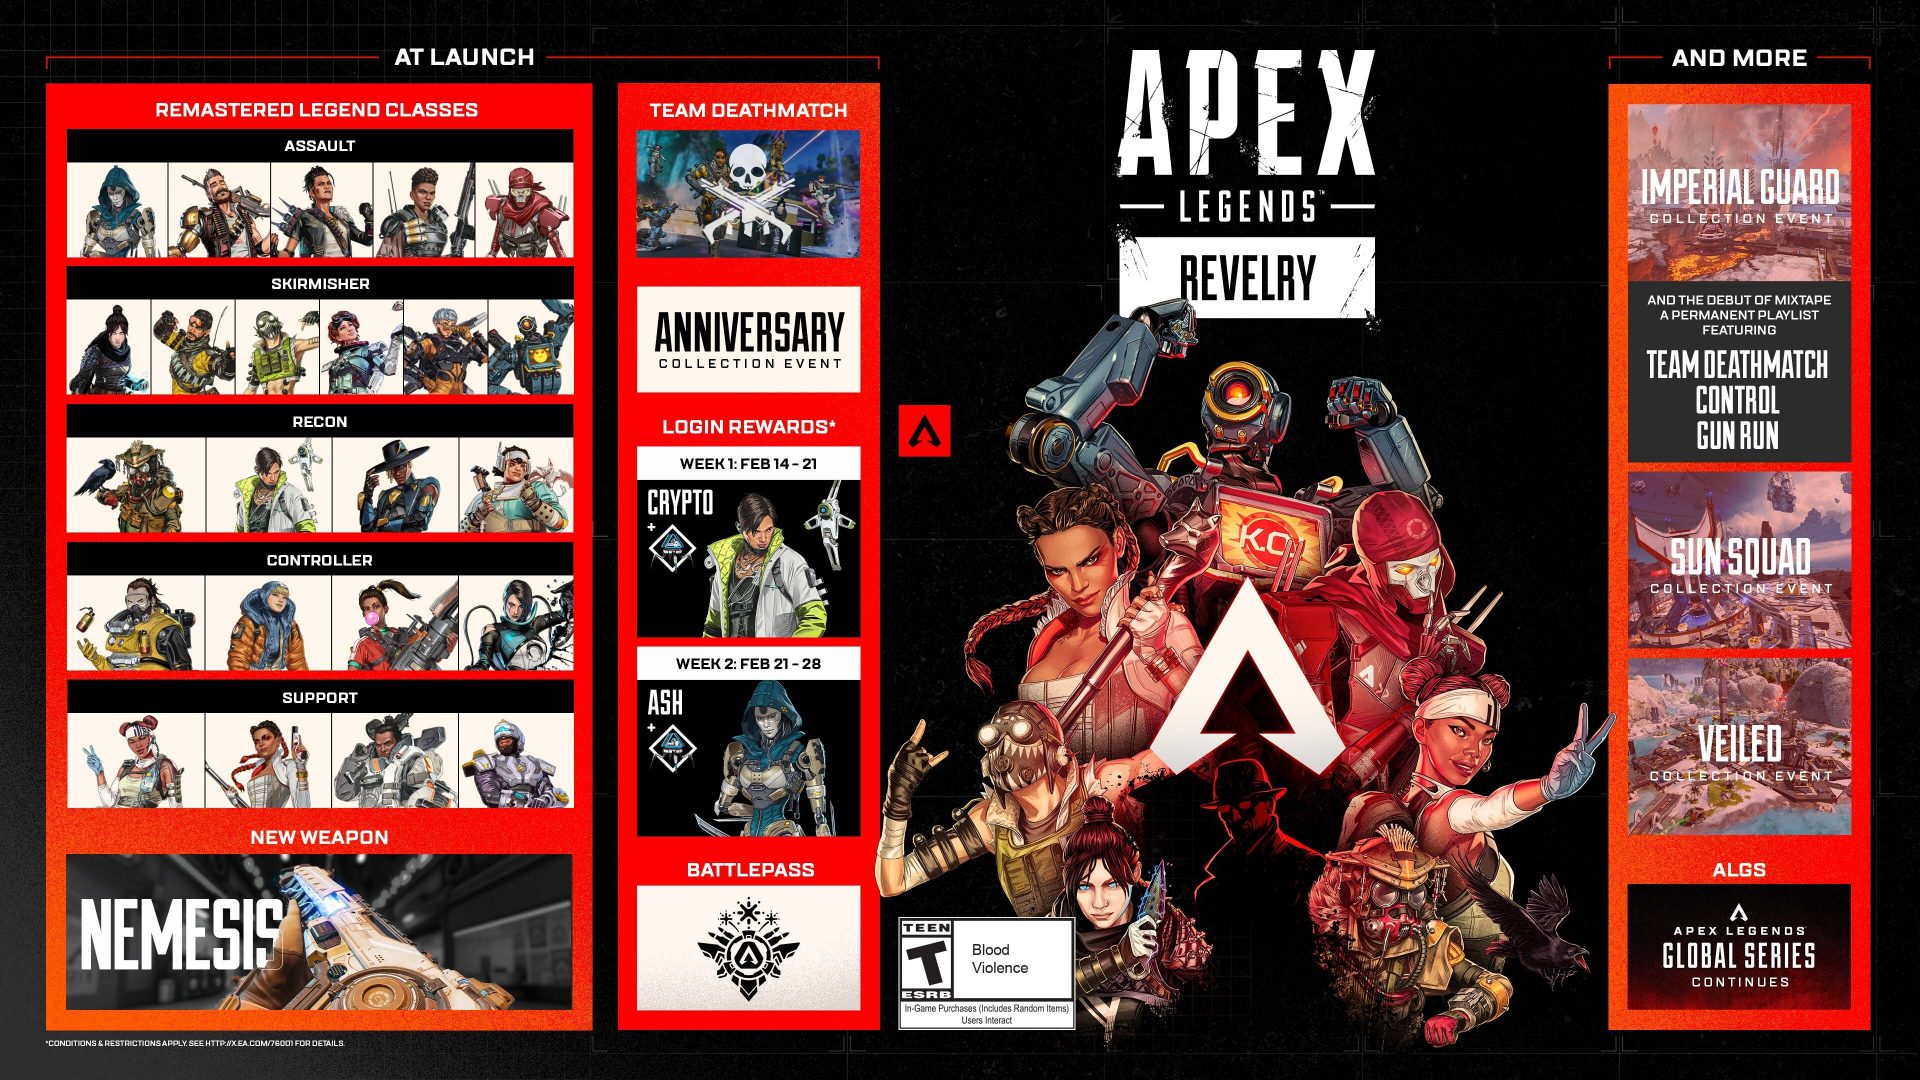 Apex Legends 4th anniversary update adds new class system, team deathmatch